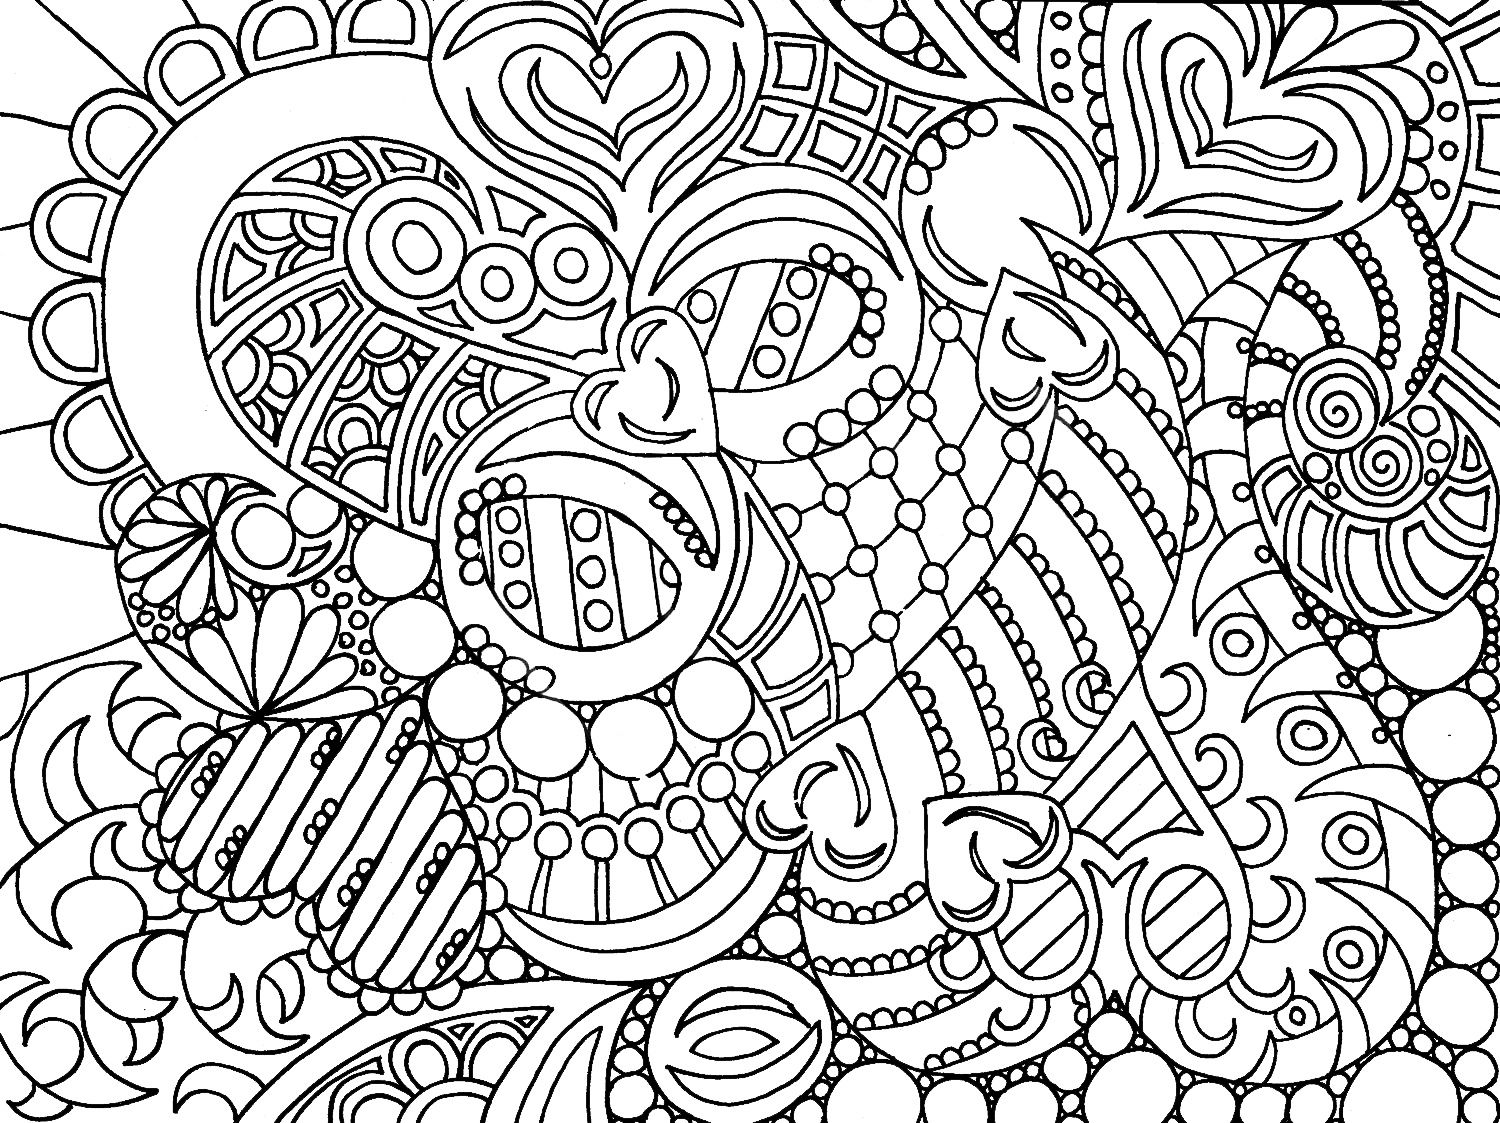 Depression Coloring Pages At Getdrawings | Free Download